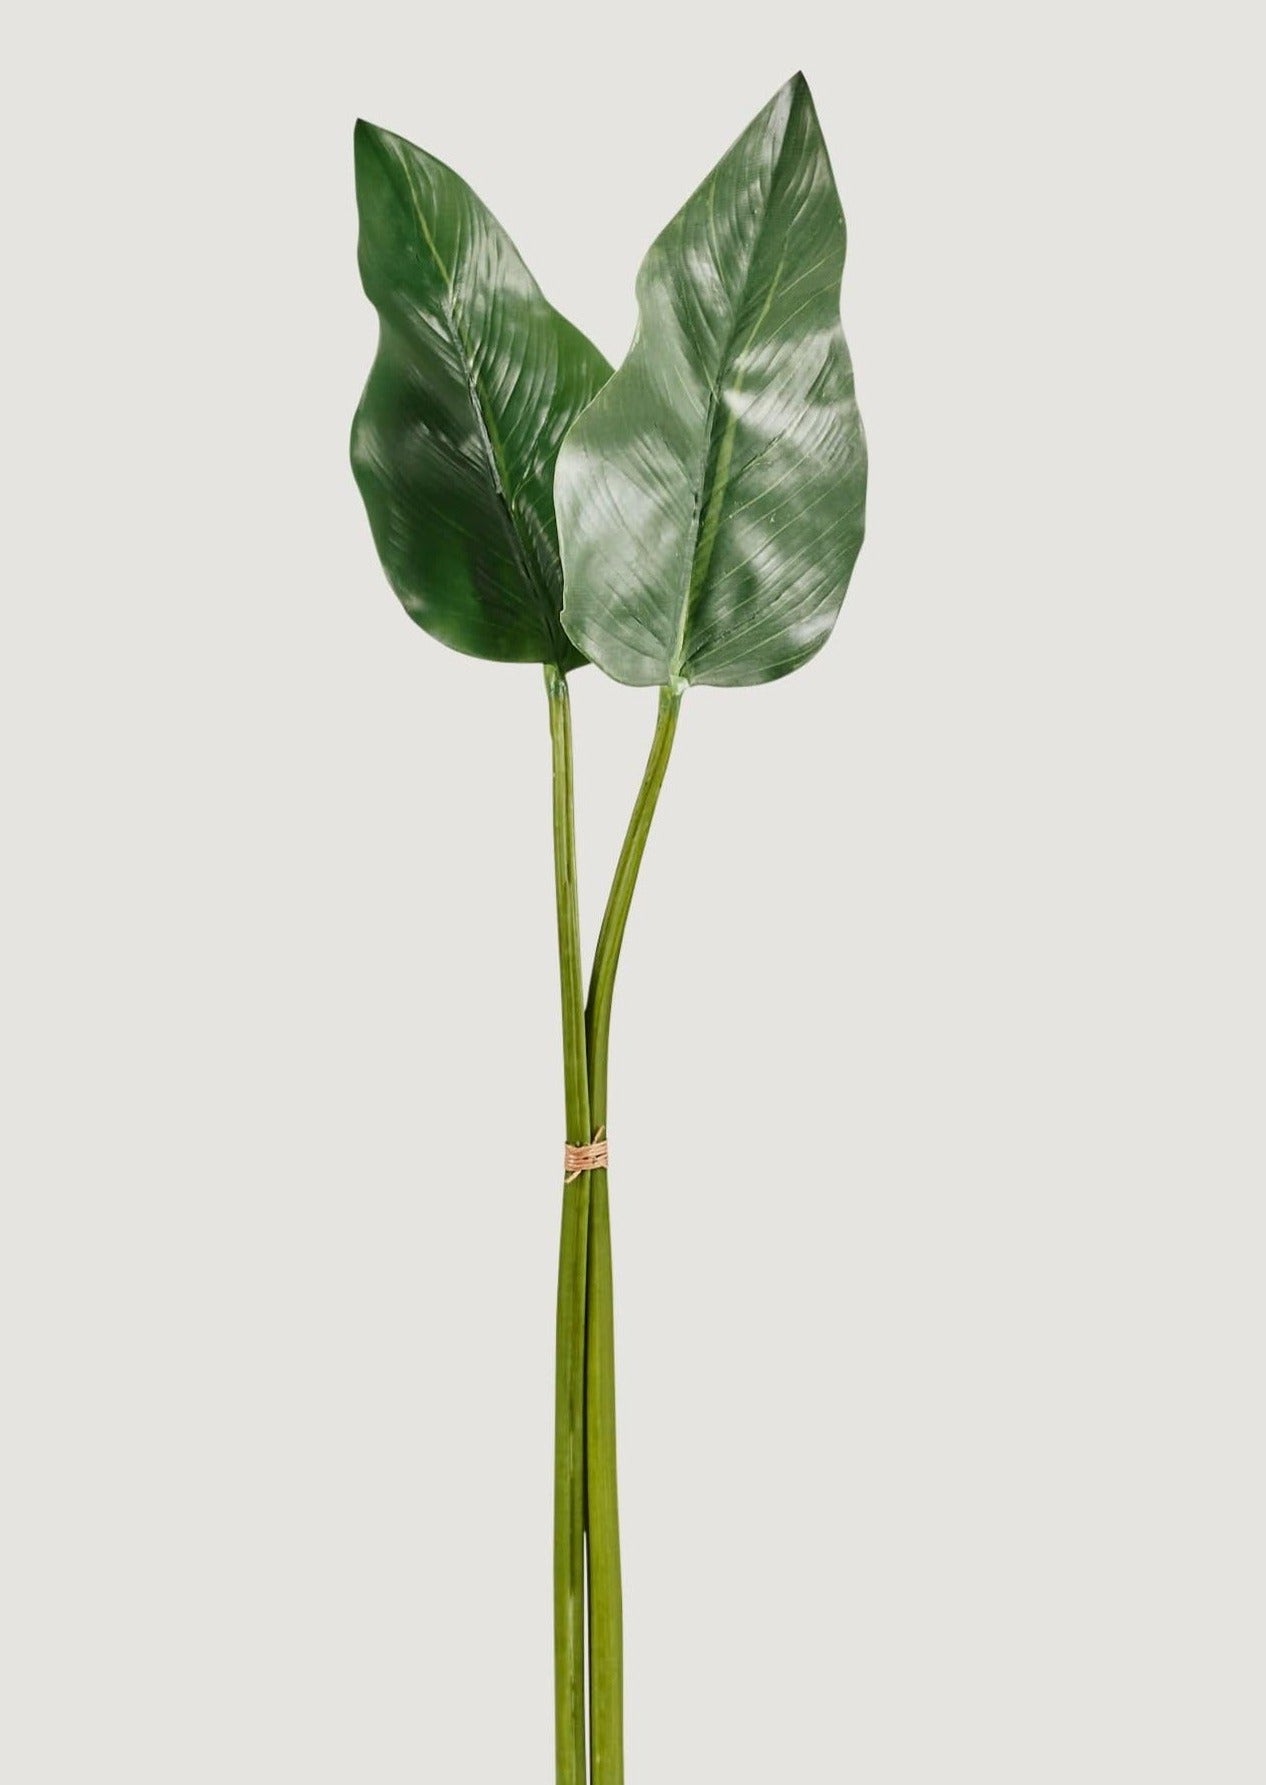 Bundle of 2 Artificial Calla Lily Leaves - 34-34.5